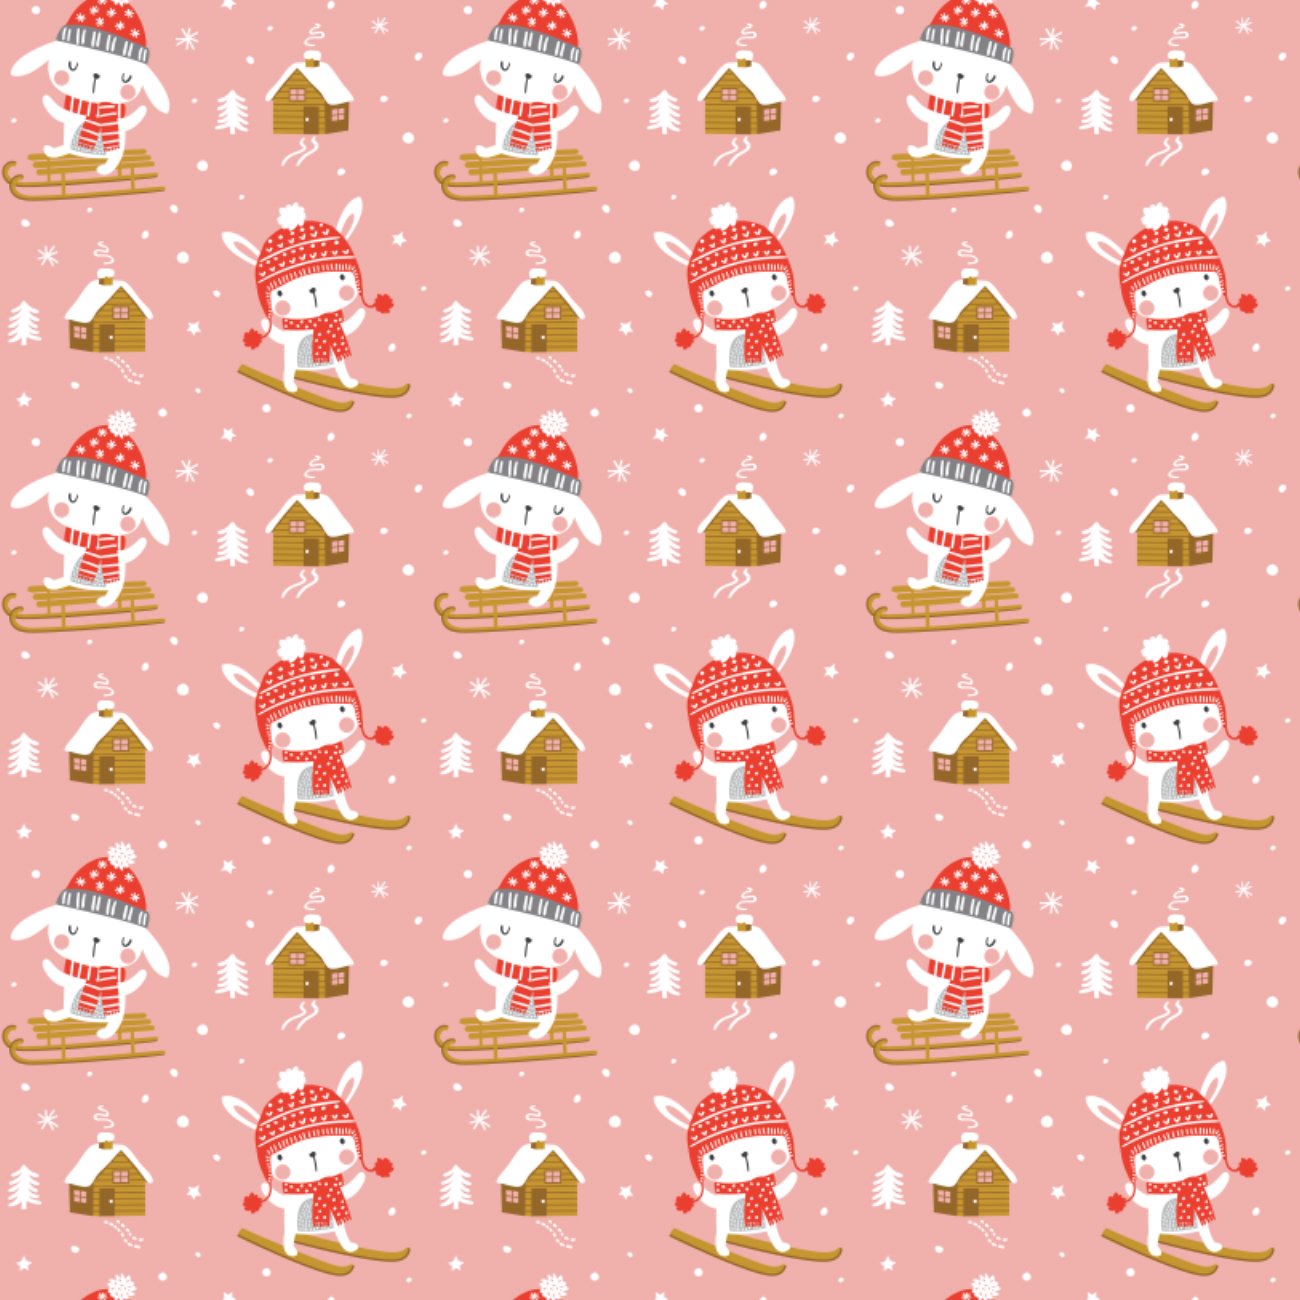 Snow Bunny - Printed Flannel by CDS - Pink